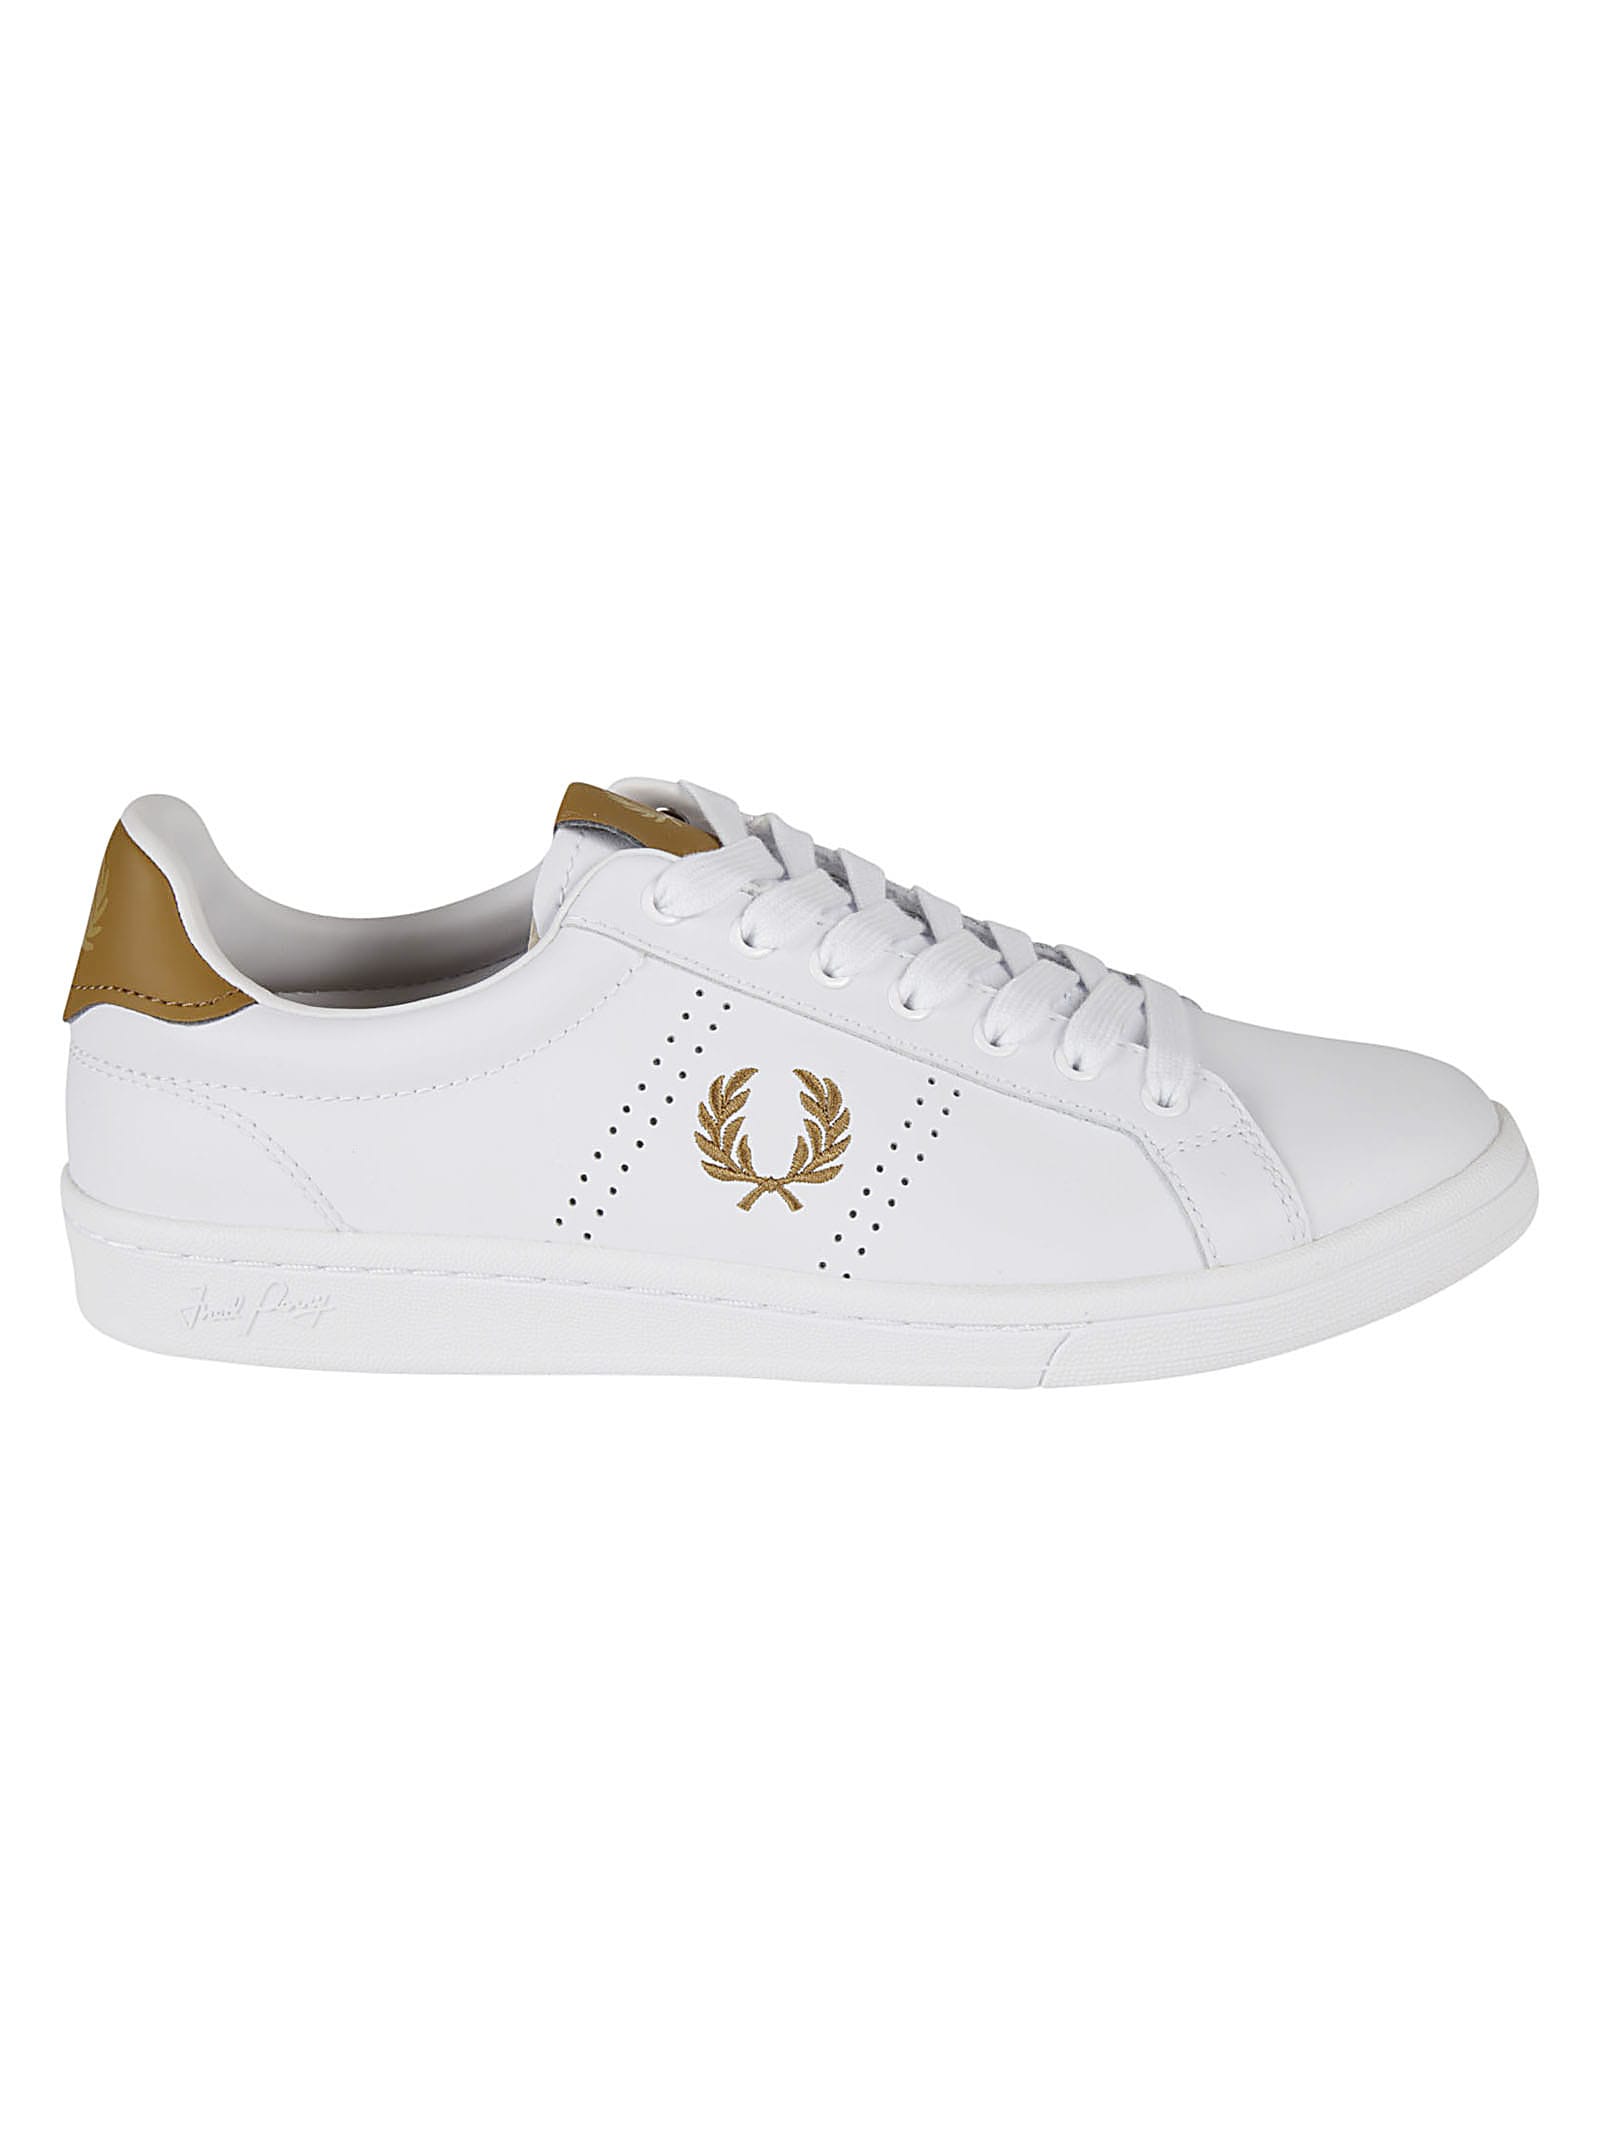 NEW FRED PERRY B4251 CLARENCE MENS PIQUE BLOOD RED CANVAS TRAINERS 